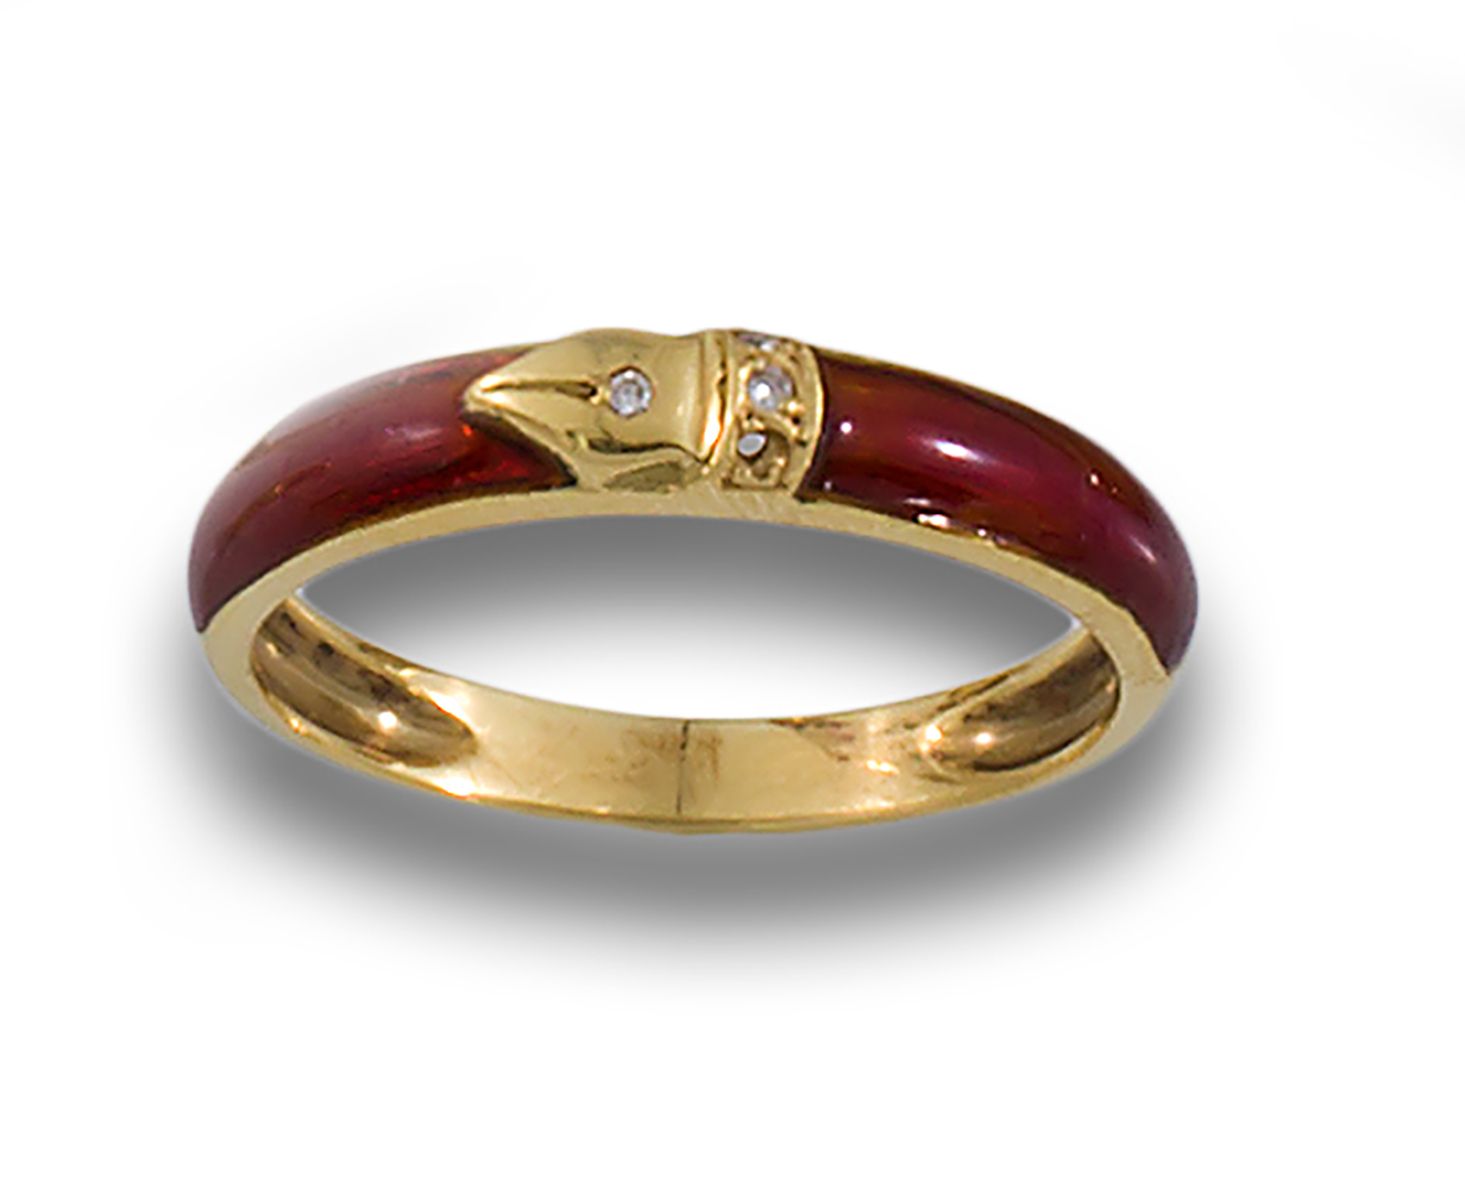 BURGUNDY ENAMELLED GOLD RING PAVE DIAMONDS 18kt yellow gold ring, paved with bri&hellip;